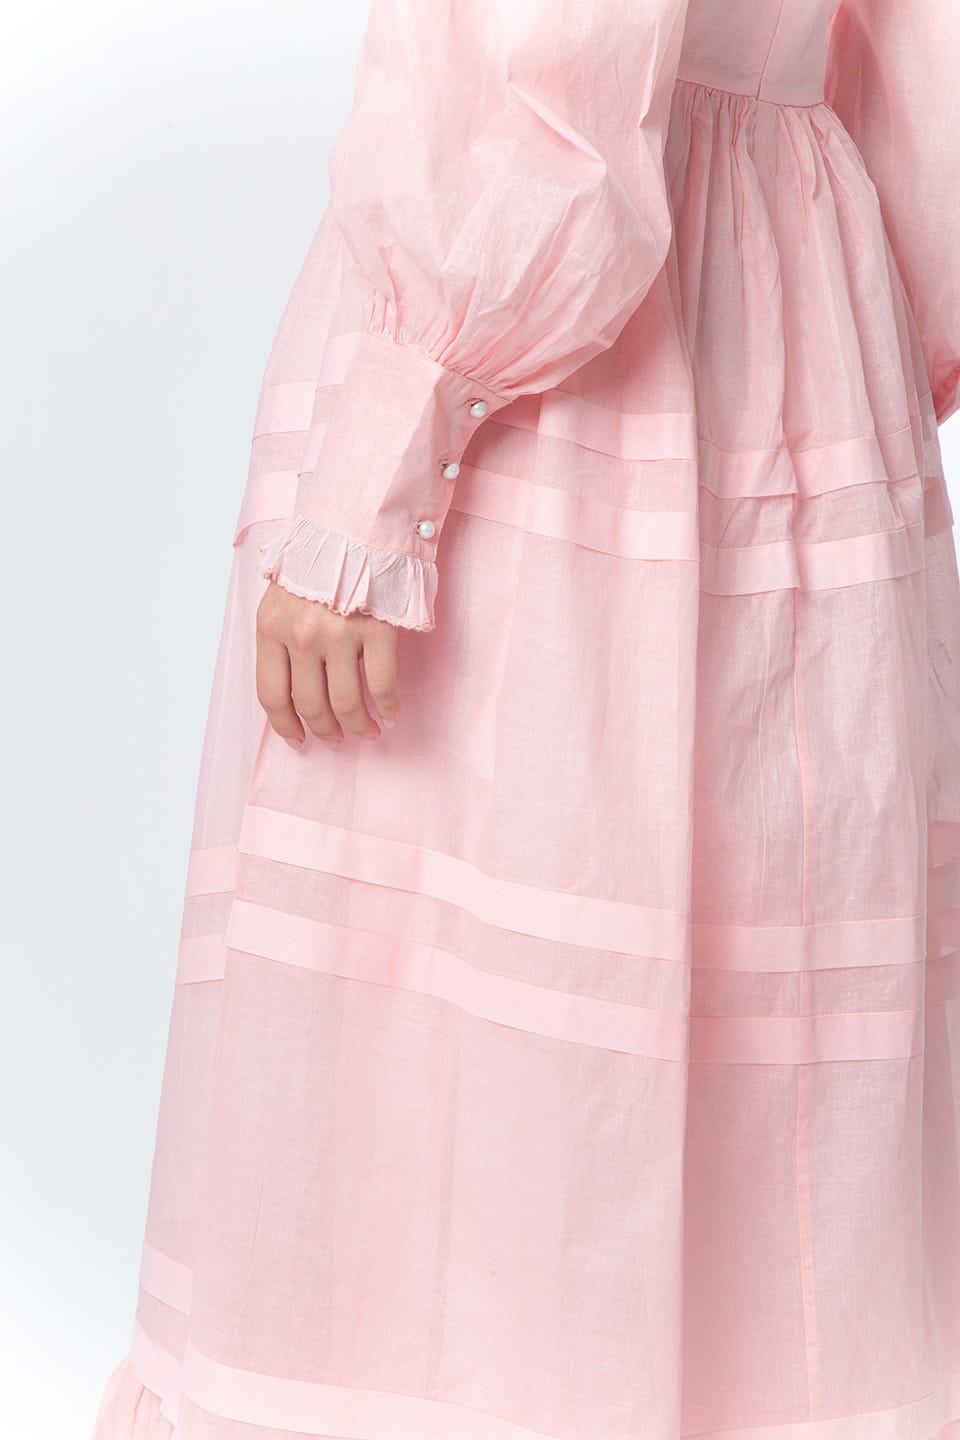 Thumbnail for Product gallery 3, Manoush religeuse long dress pink detail